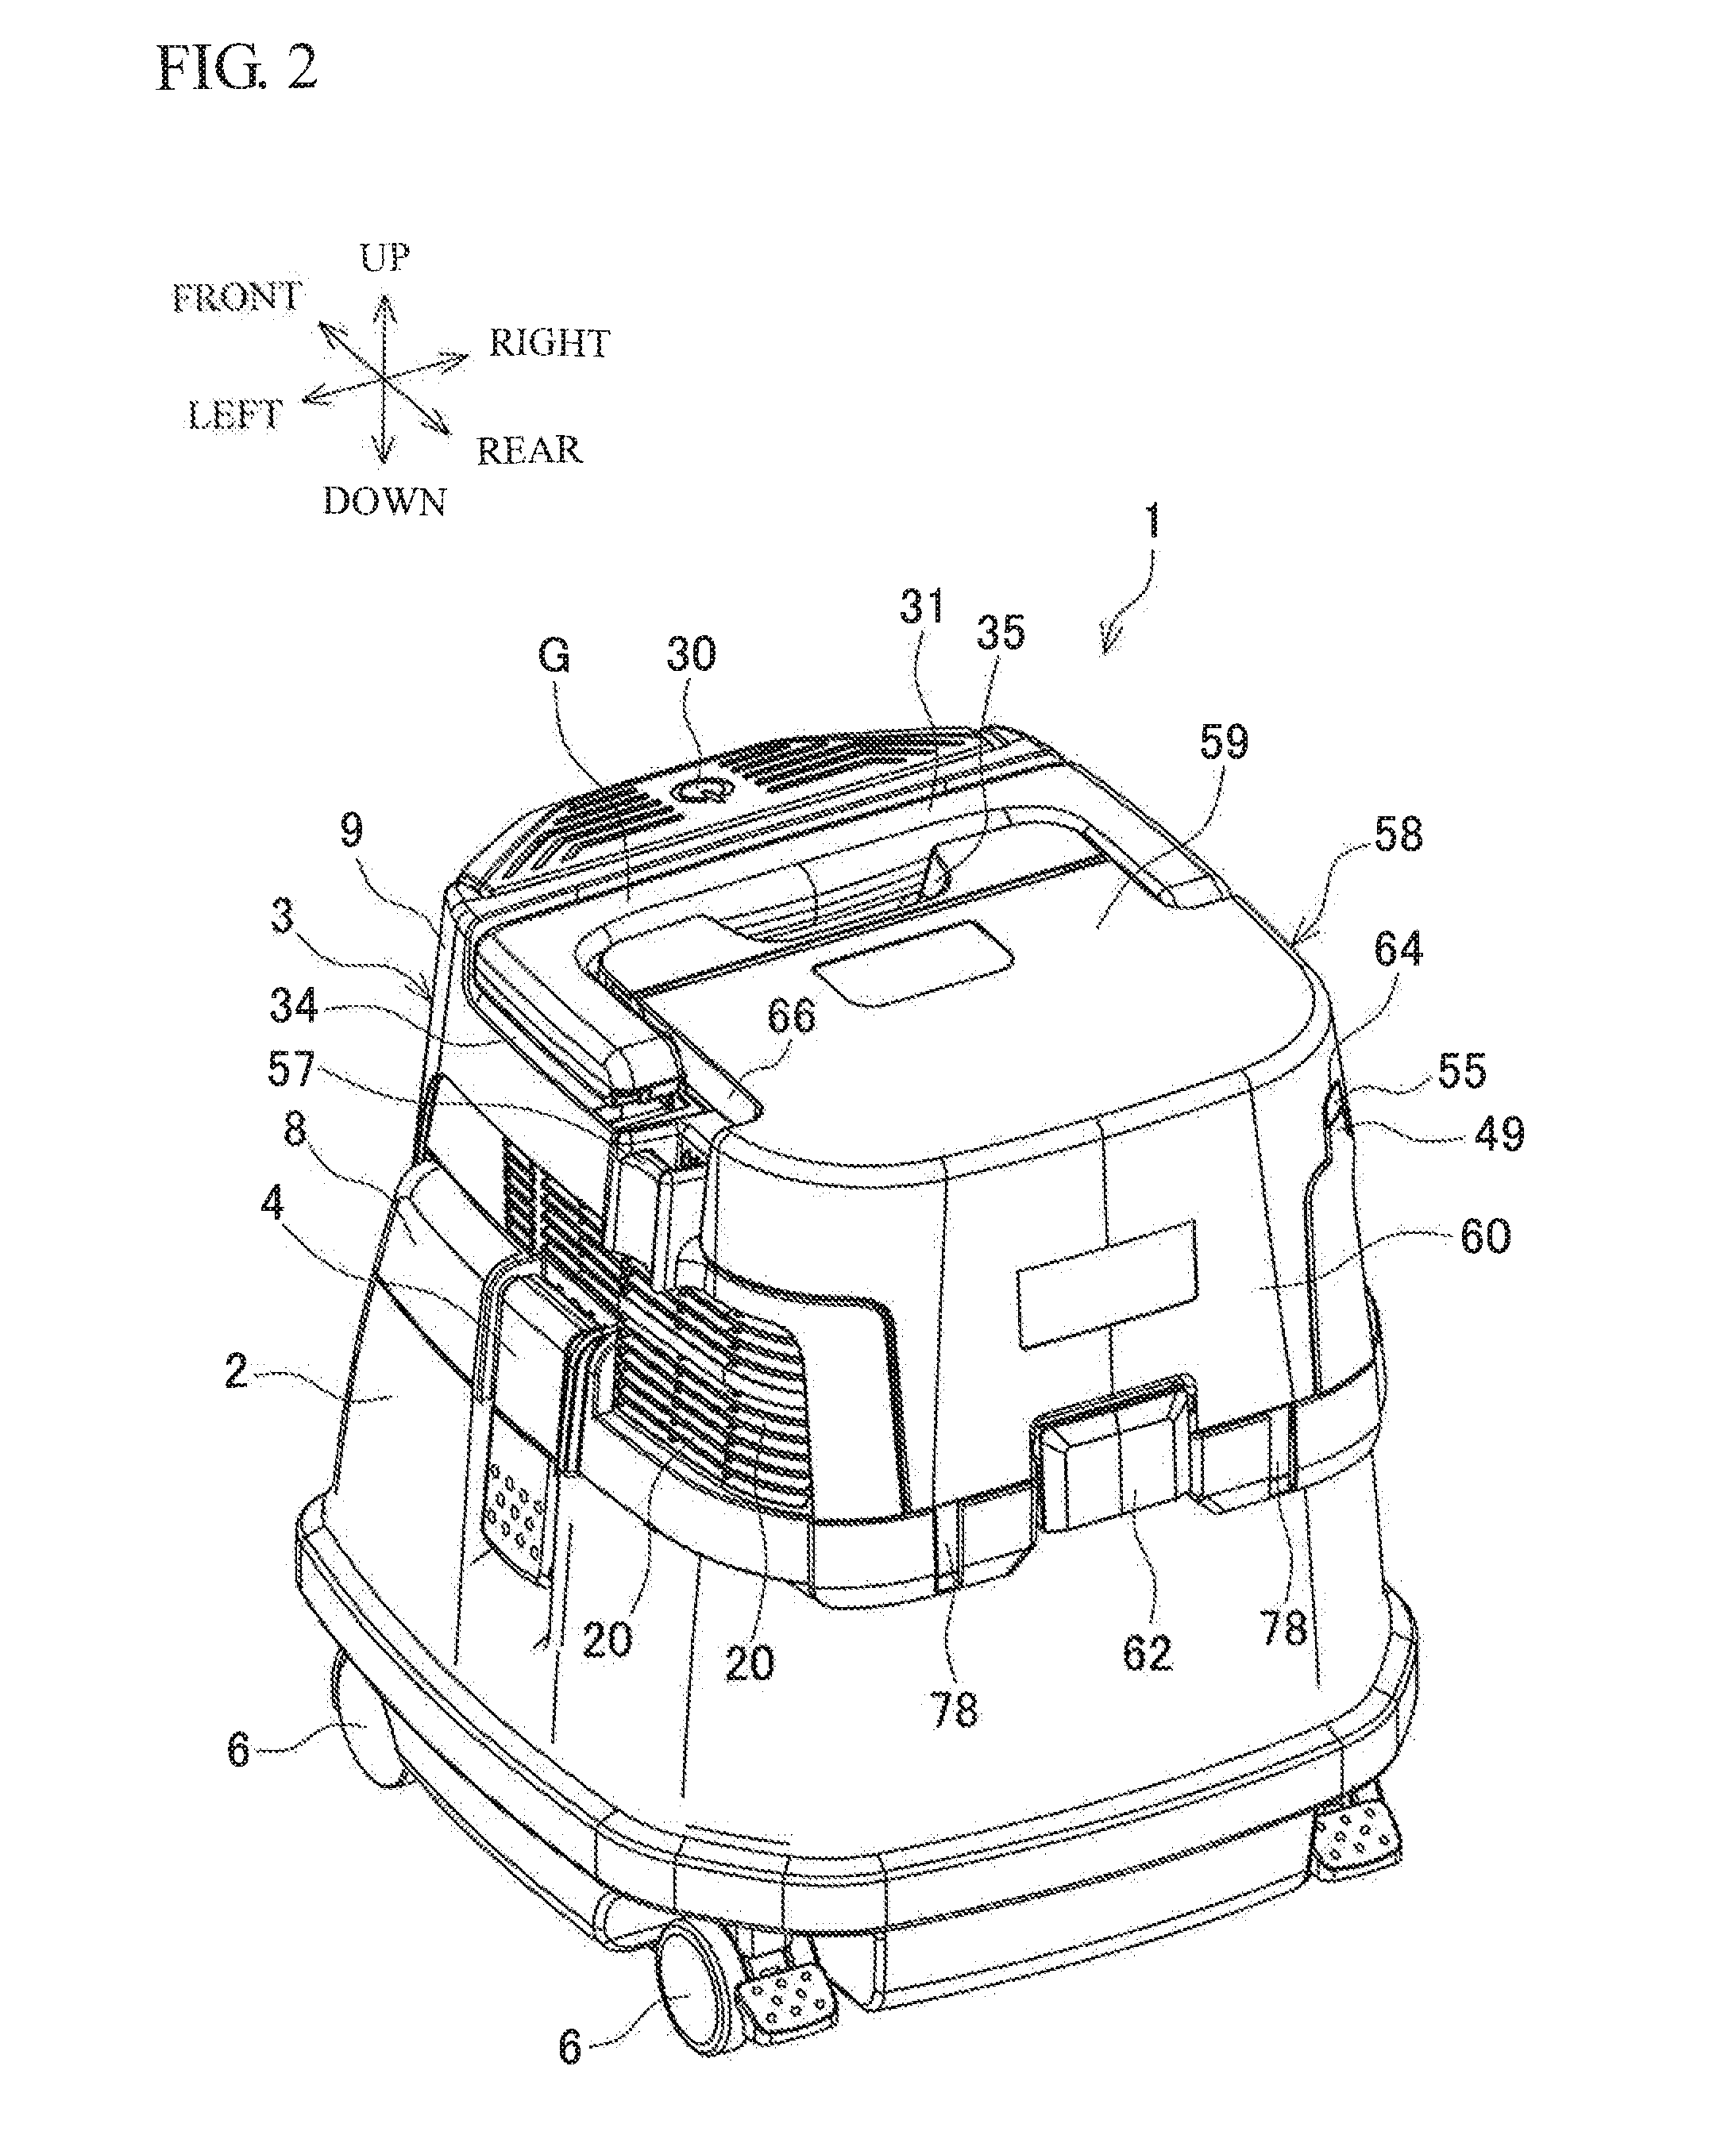 Dust collecting device